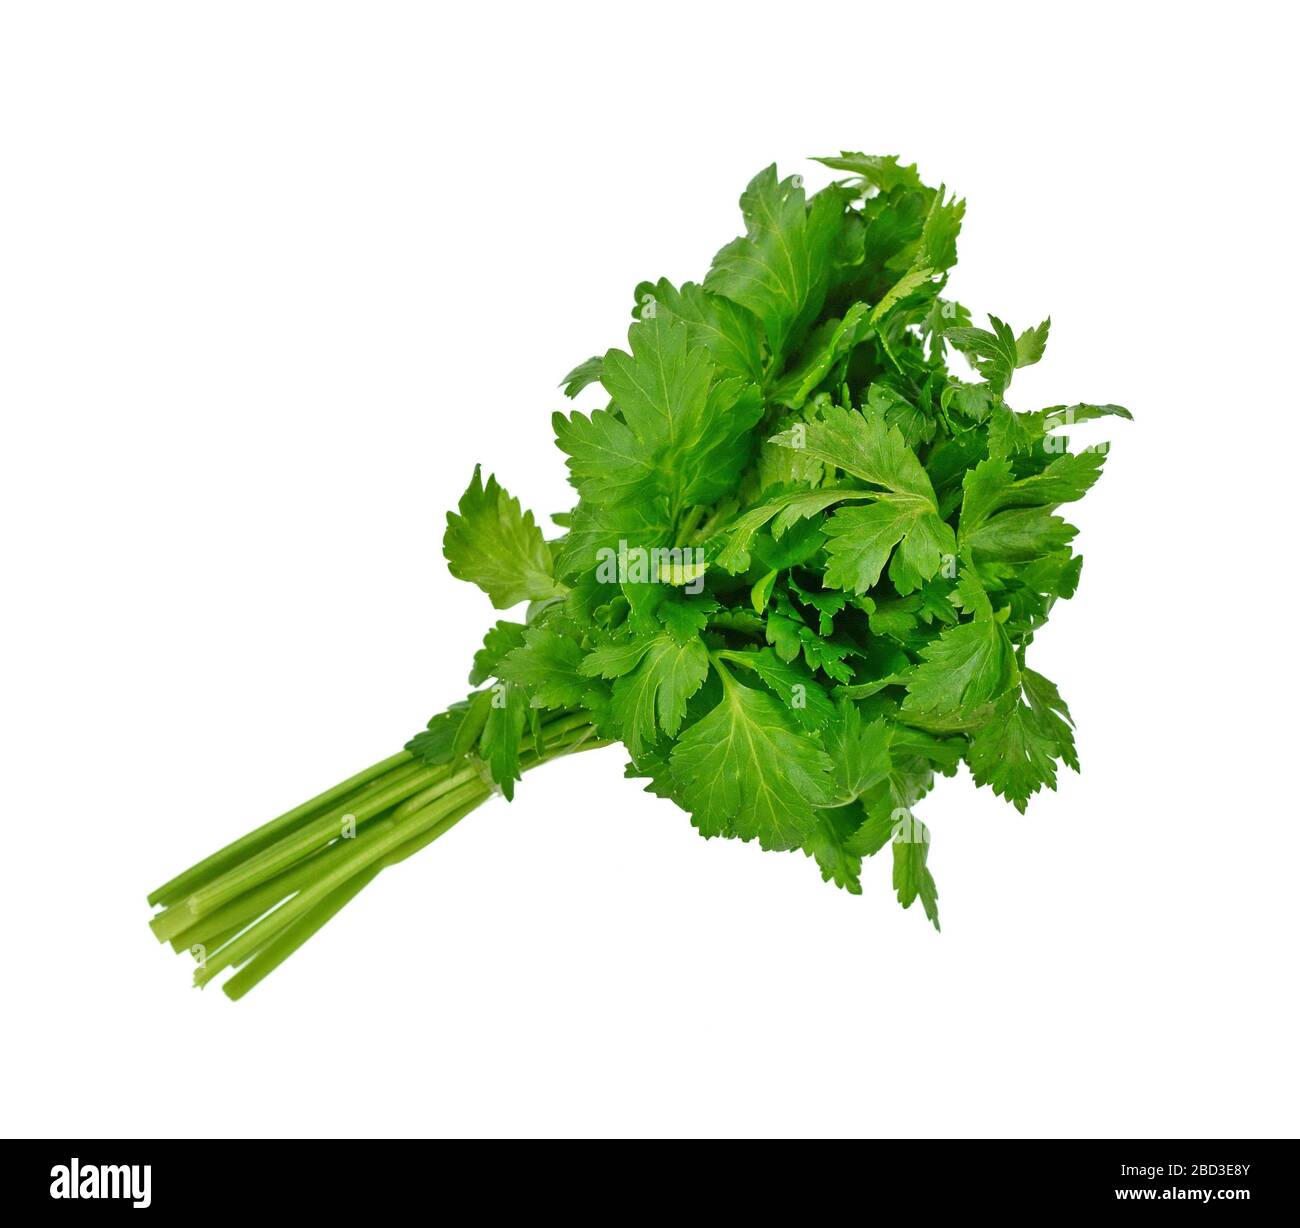 parsley bunch isolated on white background Stock Photo